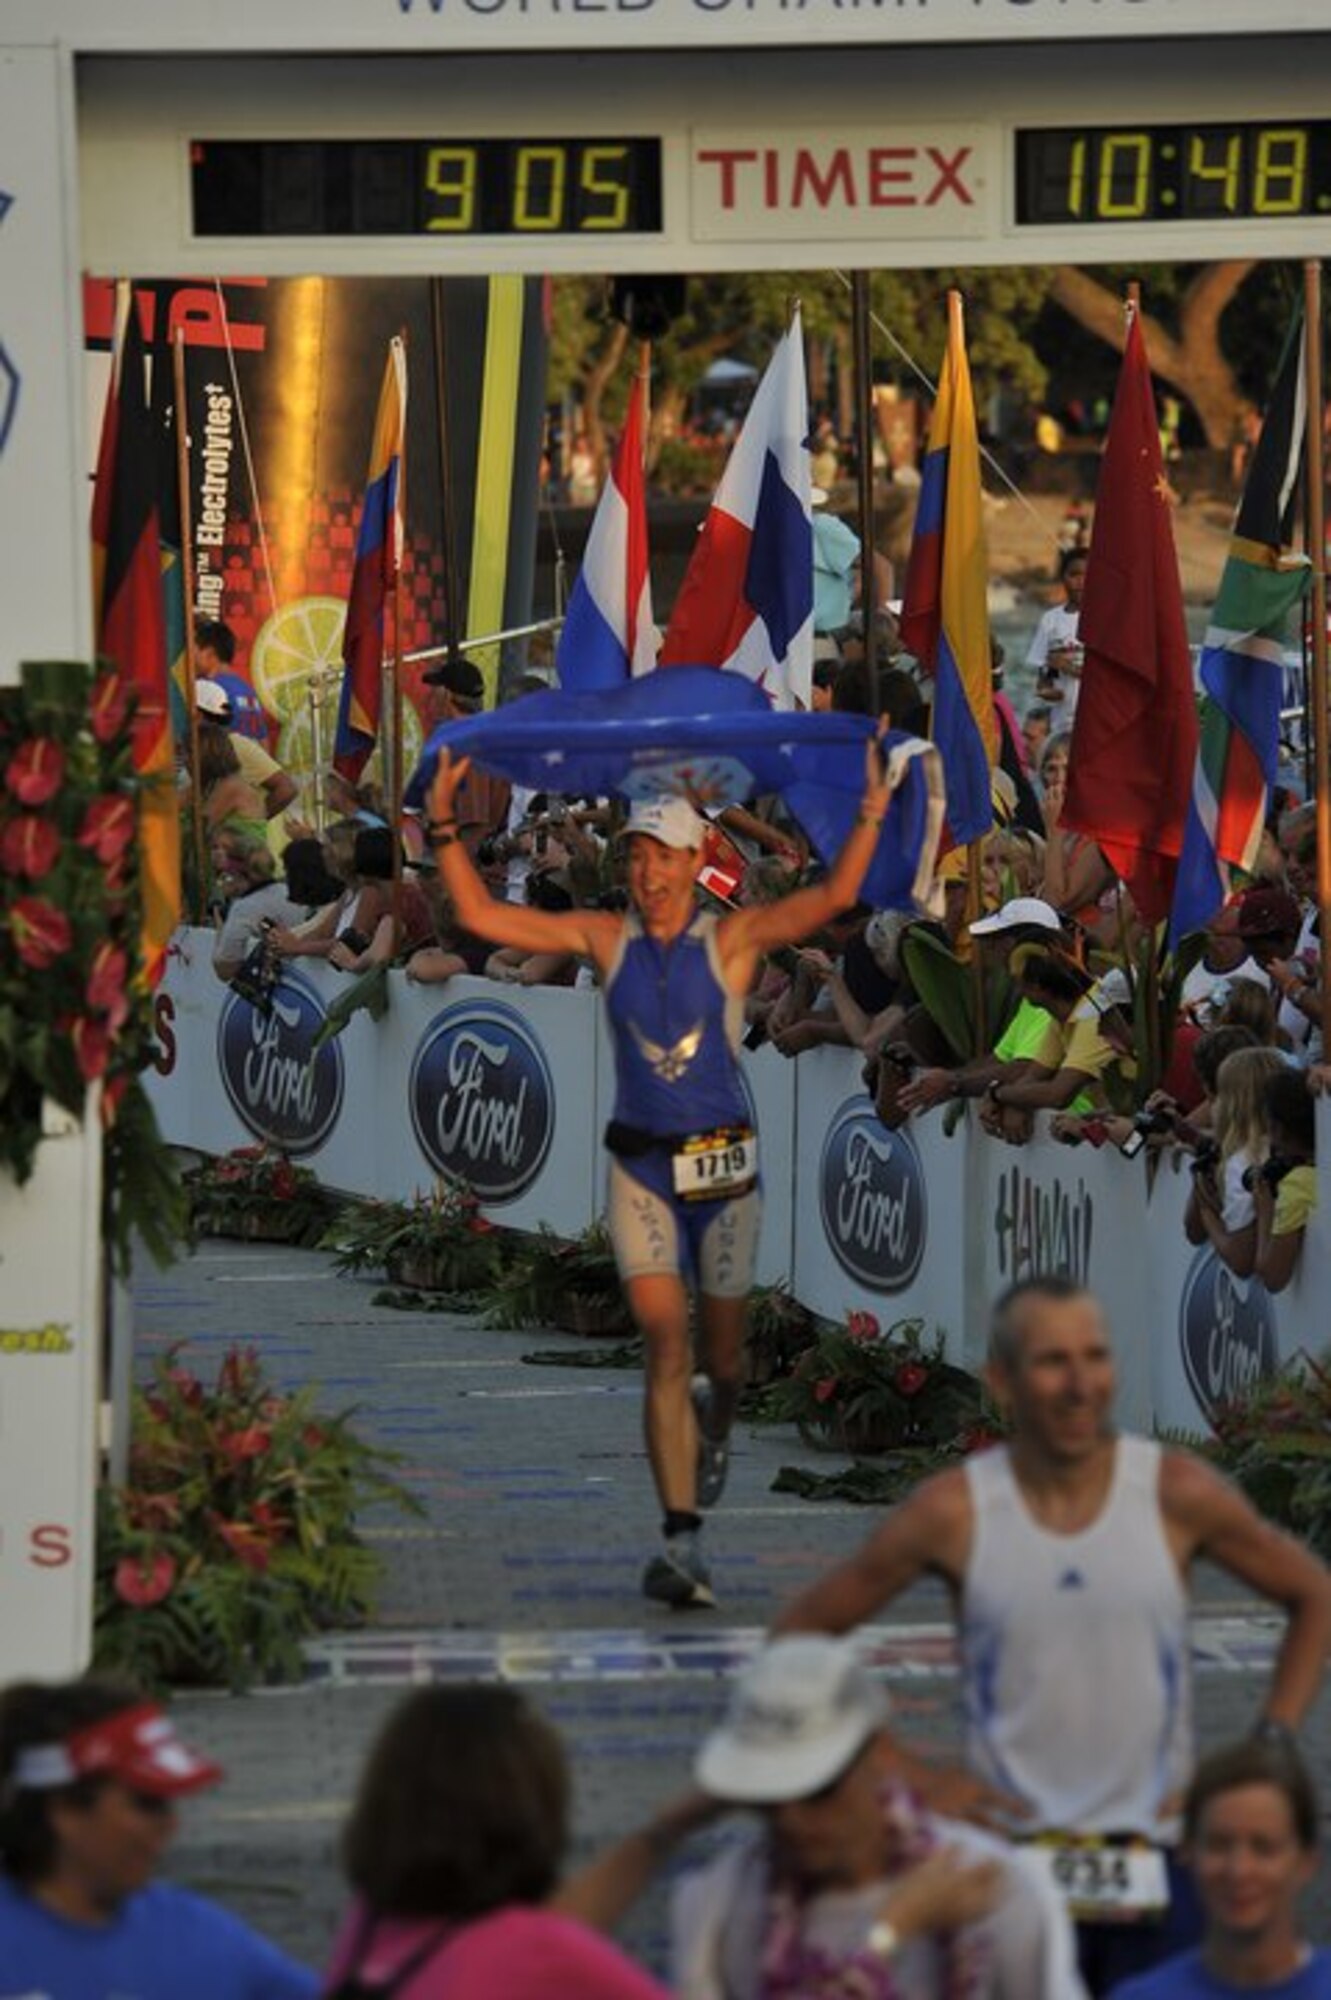 U.S. Air Force Capt. Jamie Turner crosses the finish line in 10:48:31 during the Ford Ironman World Championship Oct. 9, 2010 in Kona, Hawaii. During the race, Captain Turner endured a 2.4-mile swim, a 112-mile bike ride and a 26.2-mile marathon. Captain Turner is a pilot with the 315th Airlift Wing. (U.S. Air Force courtesy photo from the 2010 Ford Ironman World Championship)